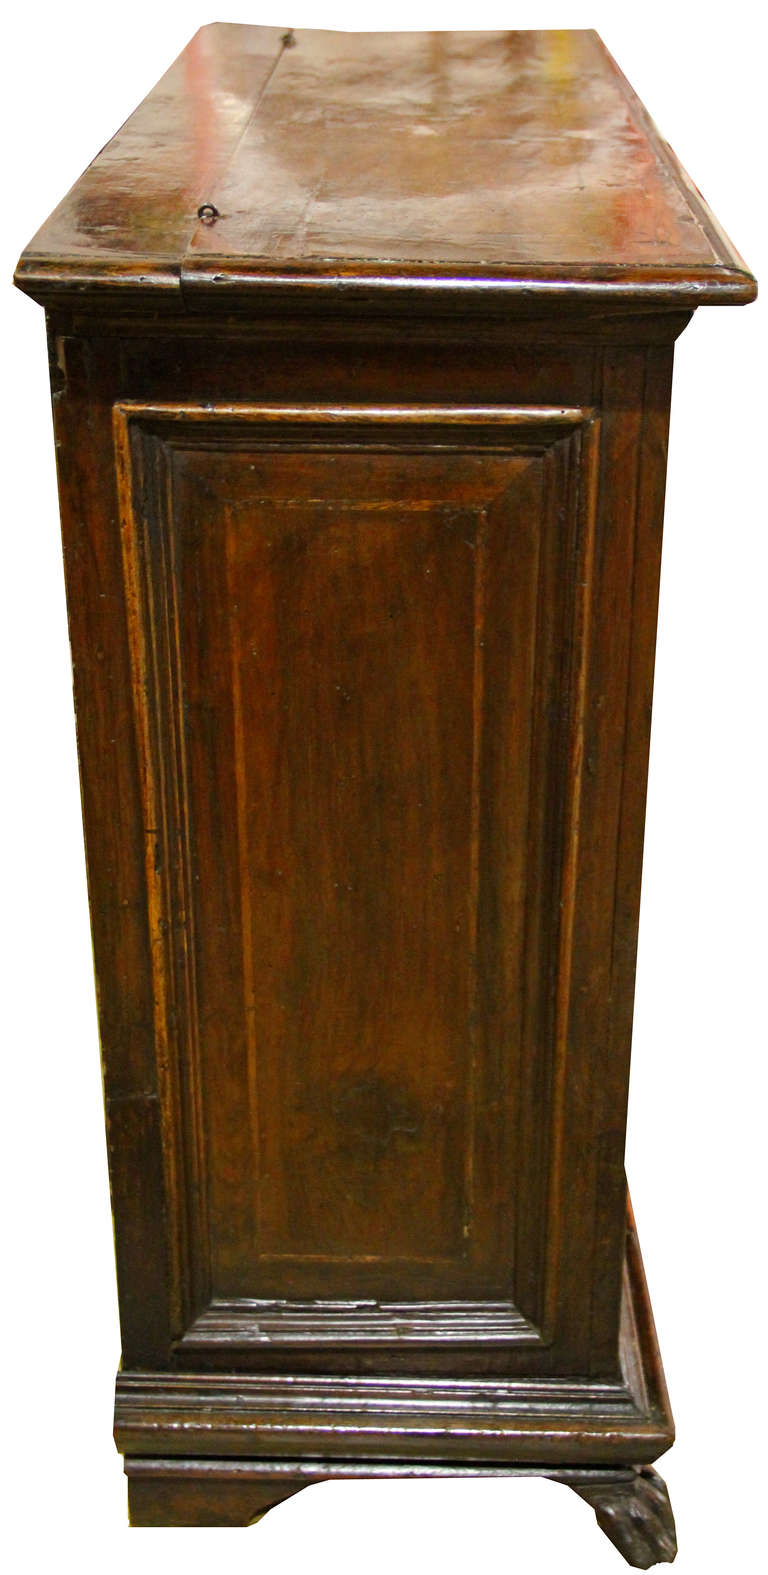 A 17th century Tuscan walnut commodino (small chest of drawers), the molded rectangular hinged top above a faux drawer (opening for storage) above two drawers below with turned rounded knobs and heart shaped keyholes, with the whole raised on lion